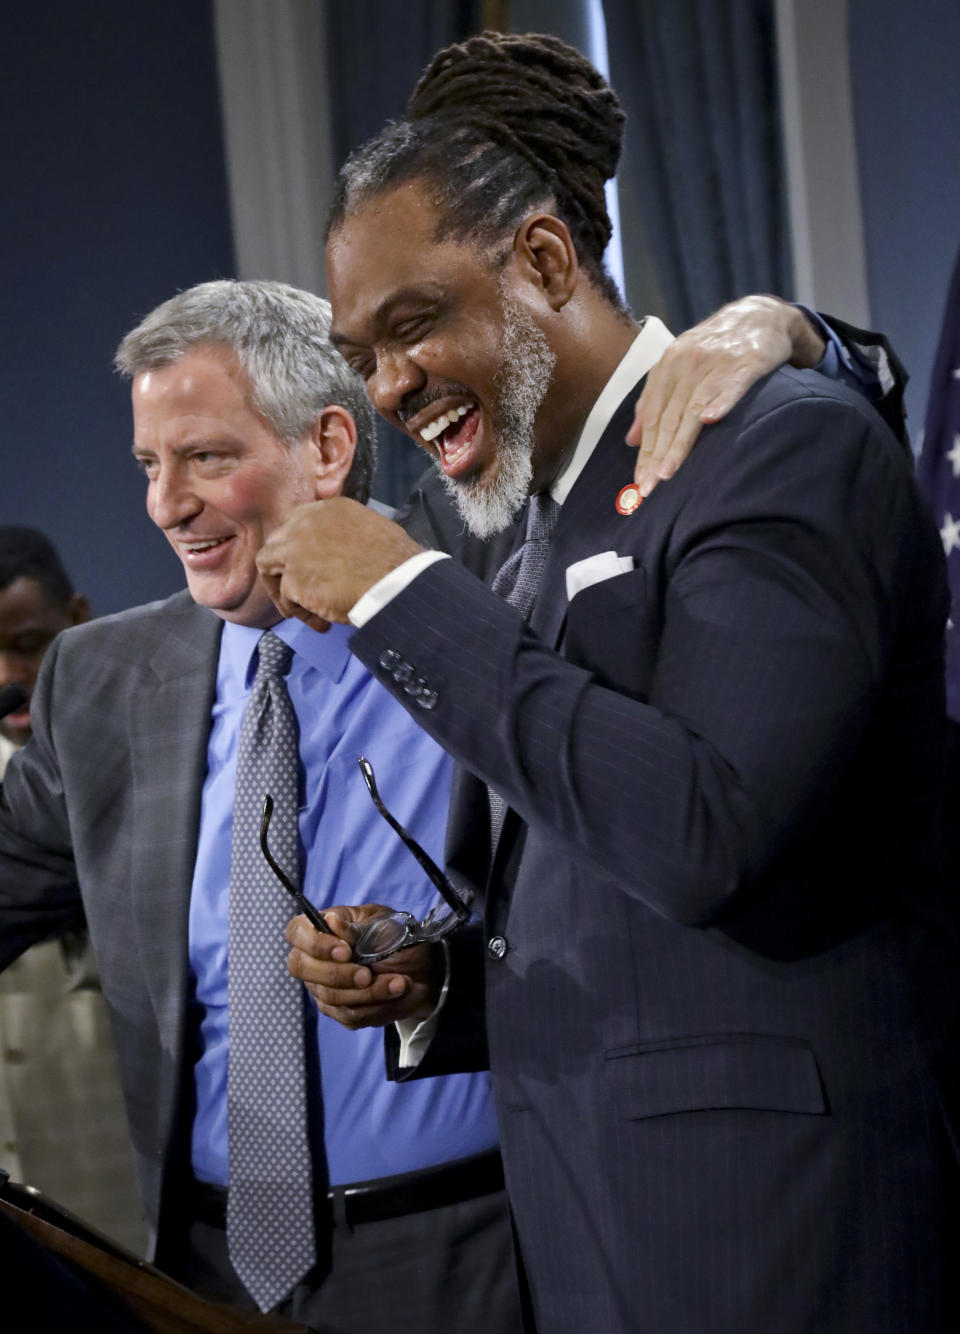 New York Mayor Bill de Blasio, left, share tall jokes humor with N.Y. City Councilman Robert Cornegy, Jr. after awarding him the Guinness World Record's prize for tallest male politician, Wednesday March 27, 2019, at City Hall in New York. (AP Photo/Bebeto Matthews)